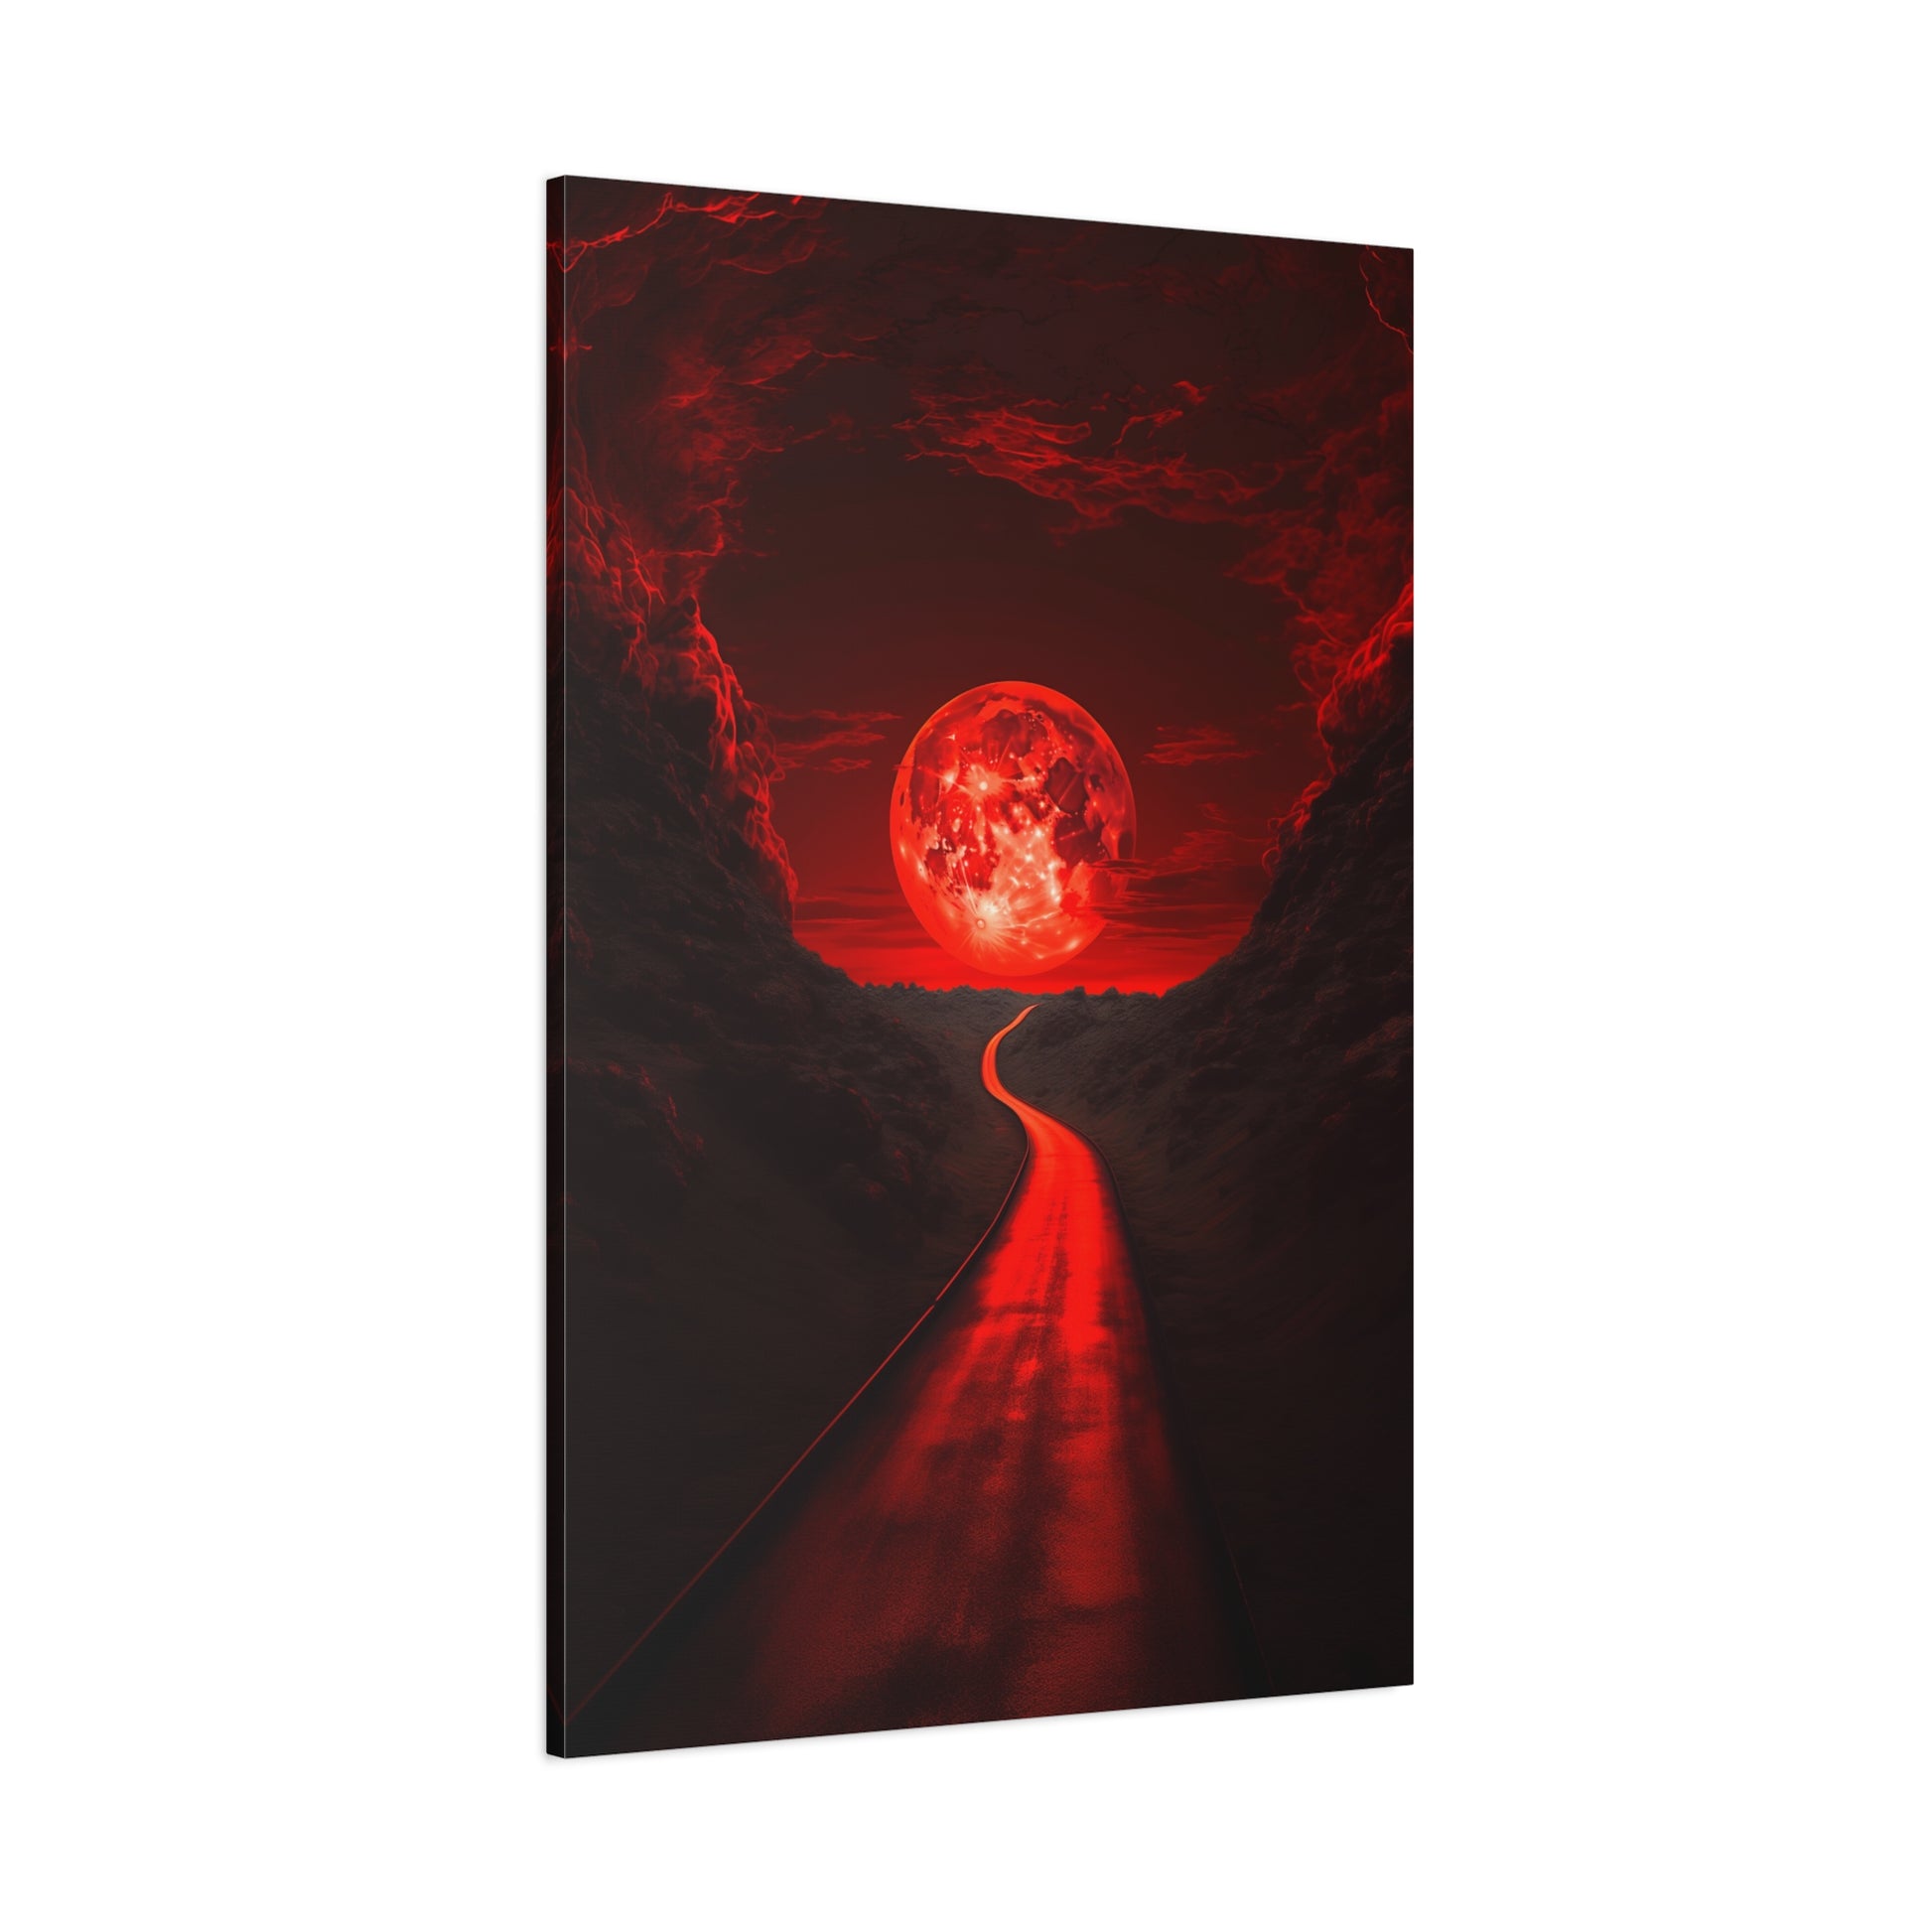 Crimson Pathway (Canvas)Crimson Pathway (Canvas  Matte finish, stretched, with a depth of 1.25 inches) Elevate your décor with RimaGallery’s responsibly made art canvases. Our eco-friendly RimaGallery